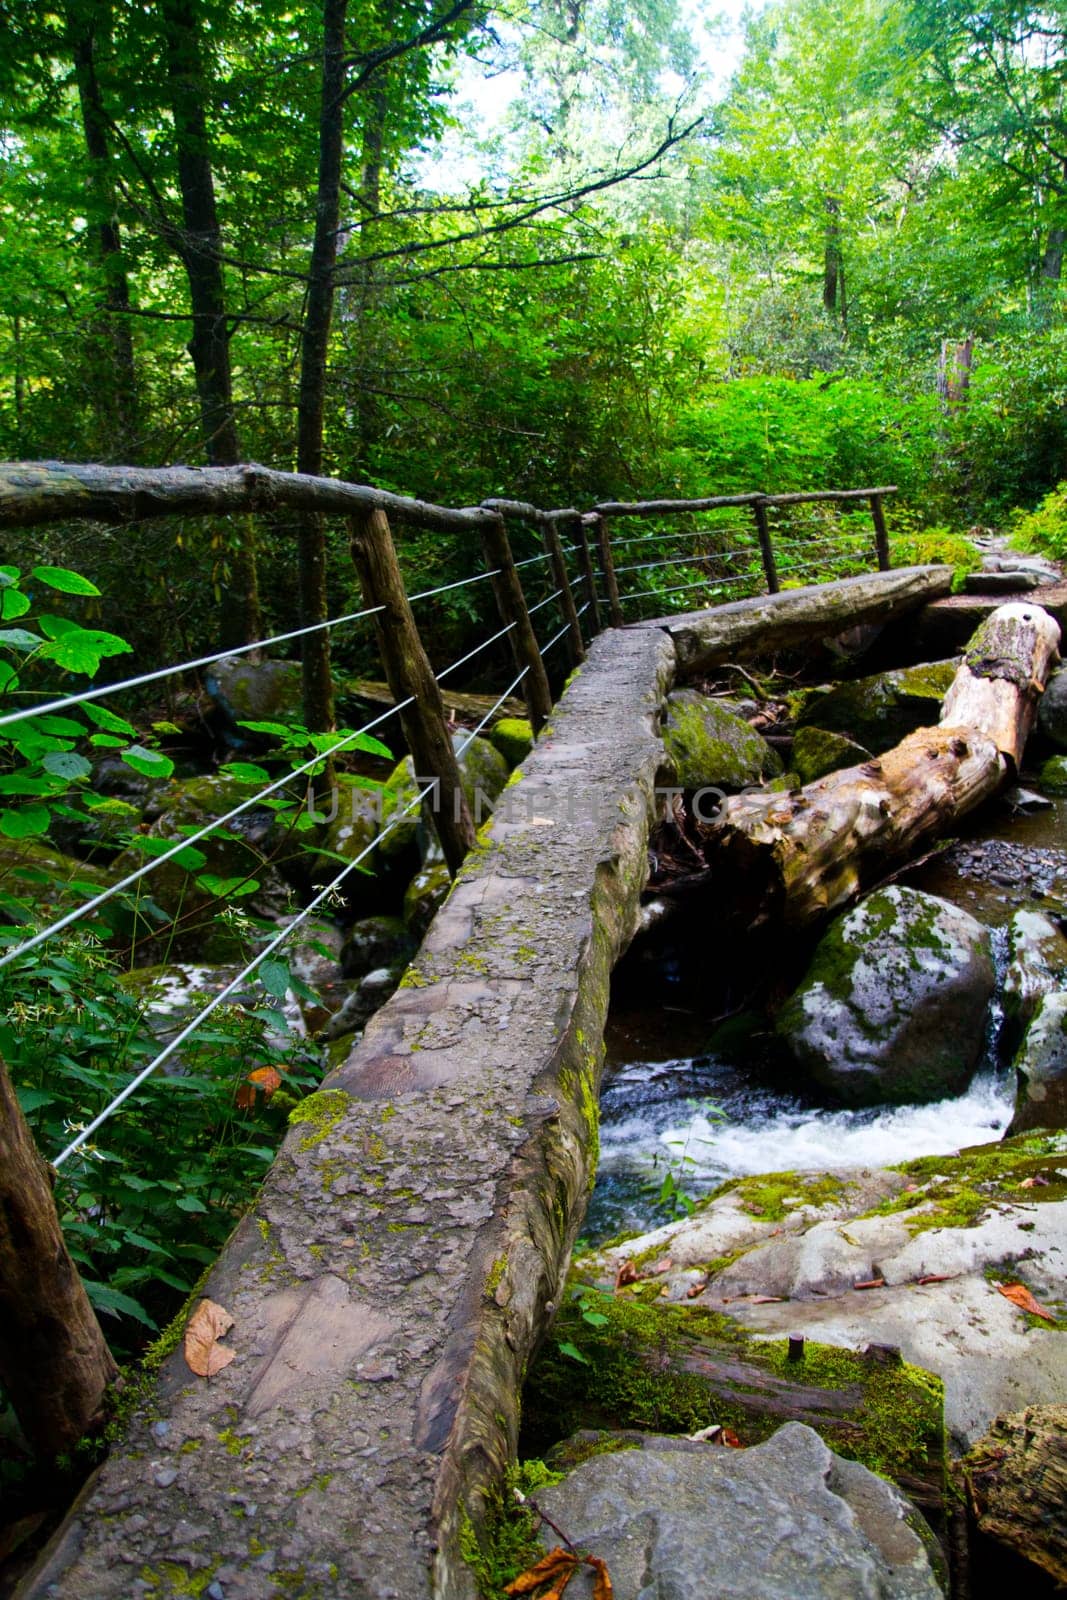 Tranquil wooden bridge crossing a babbling brook in a lush Tennessee forest. Experience the serenity of nature and eco-friendly architecture.